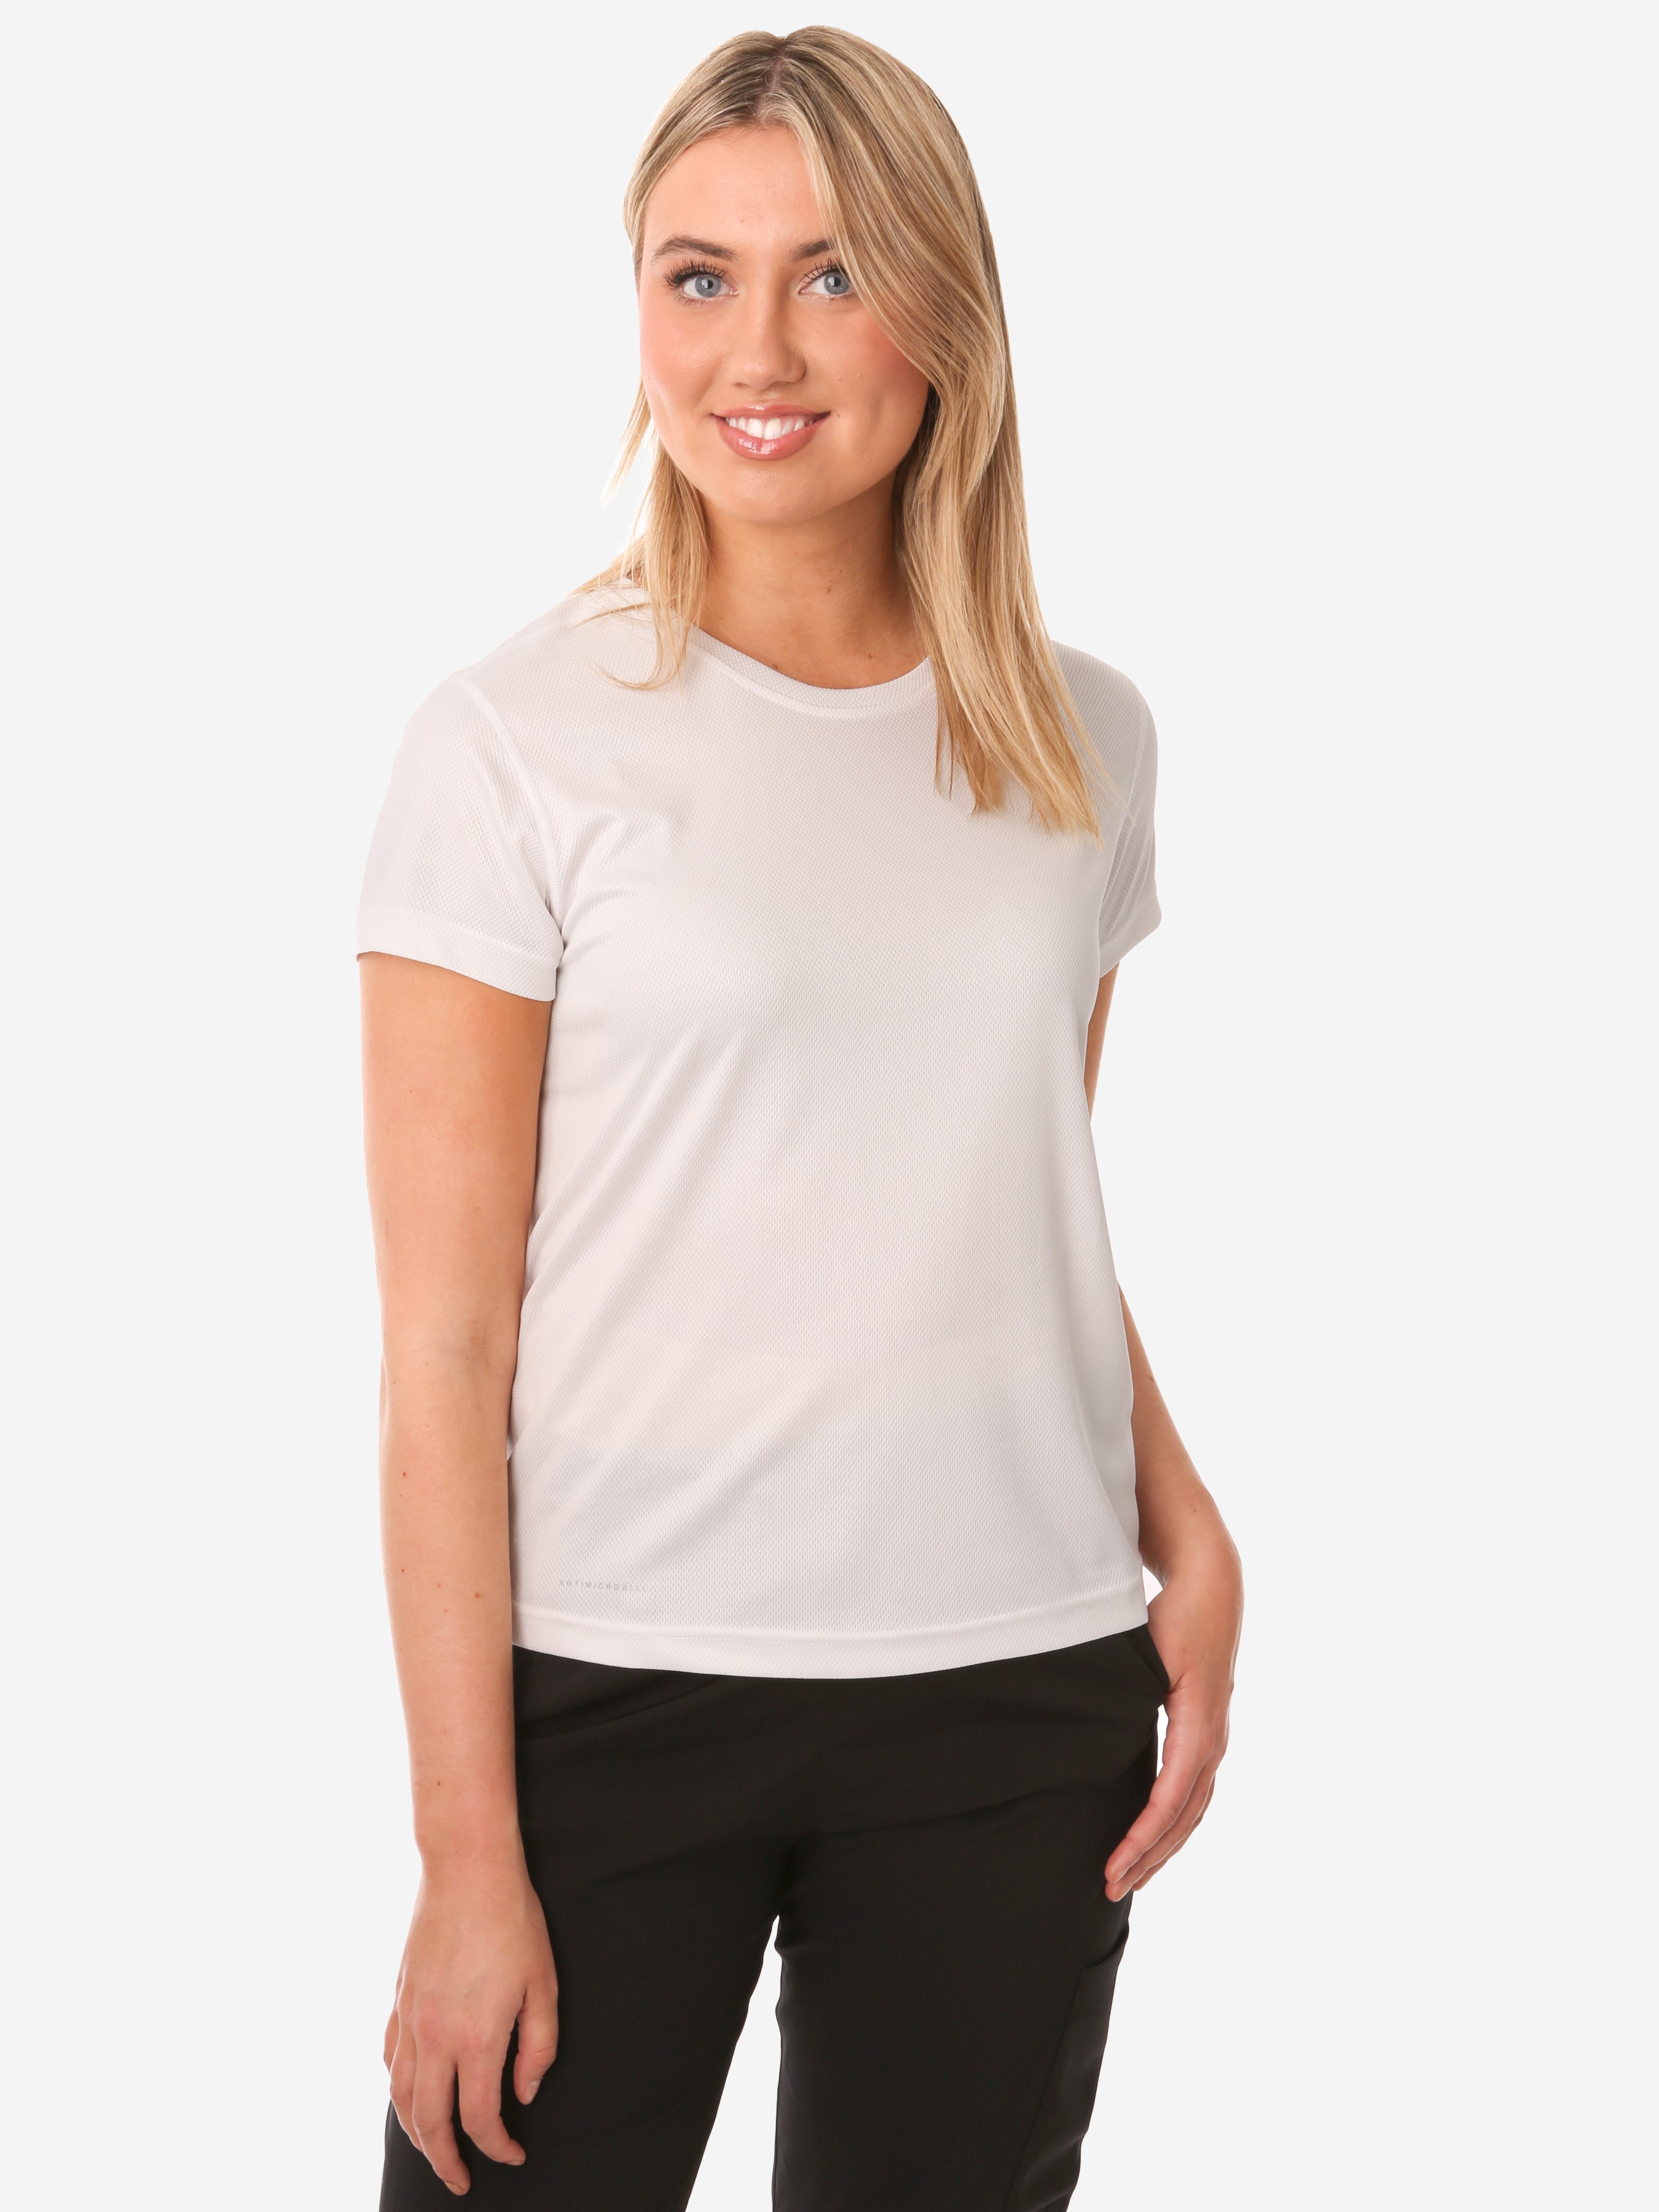 Scrubs for Women  The Best (And Cutest) Scrubs For Medical Professionals –  TiScrubs